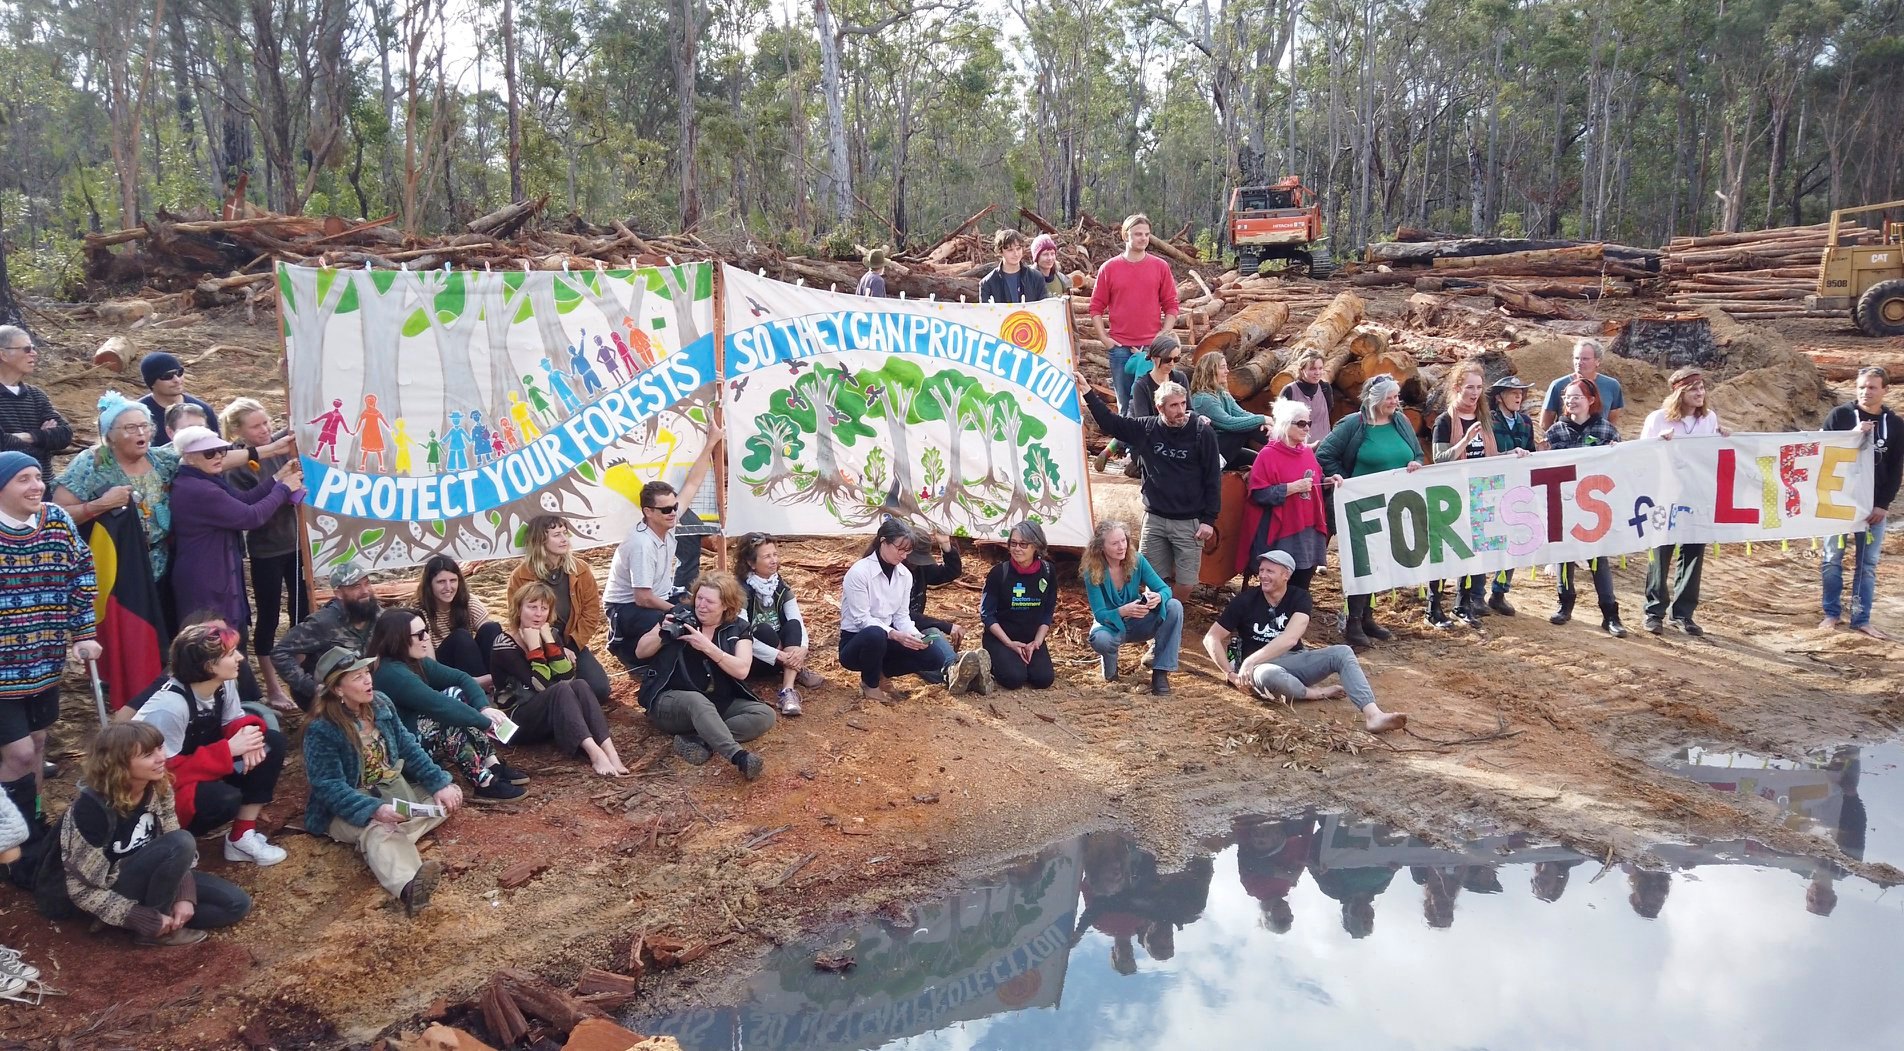 Community members protesting deforestation in Jane's Cry of the Forest